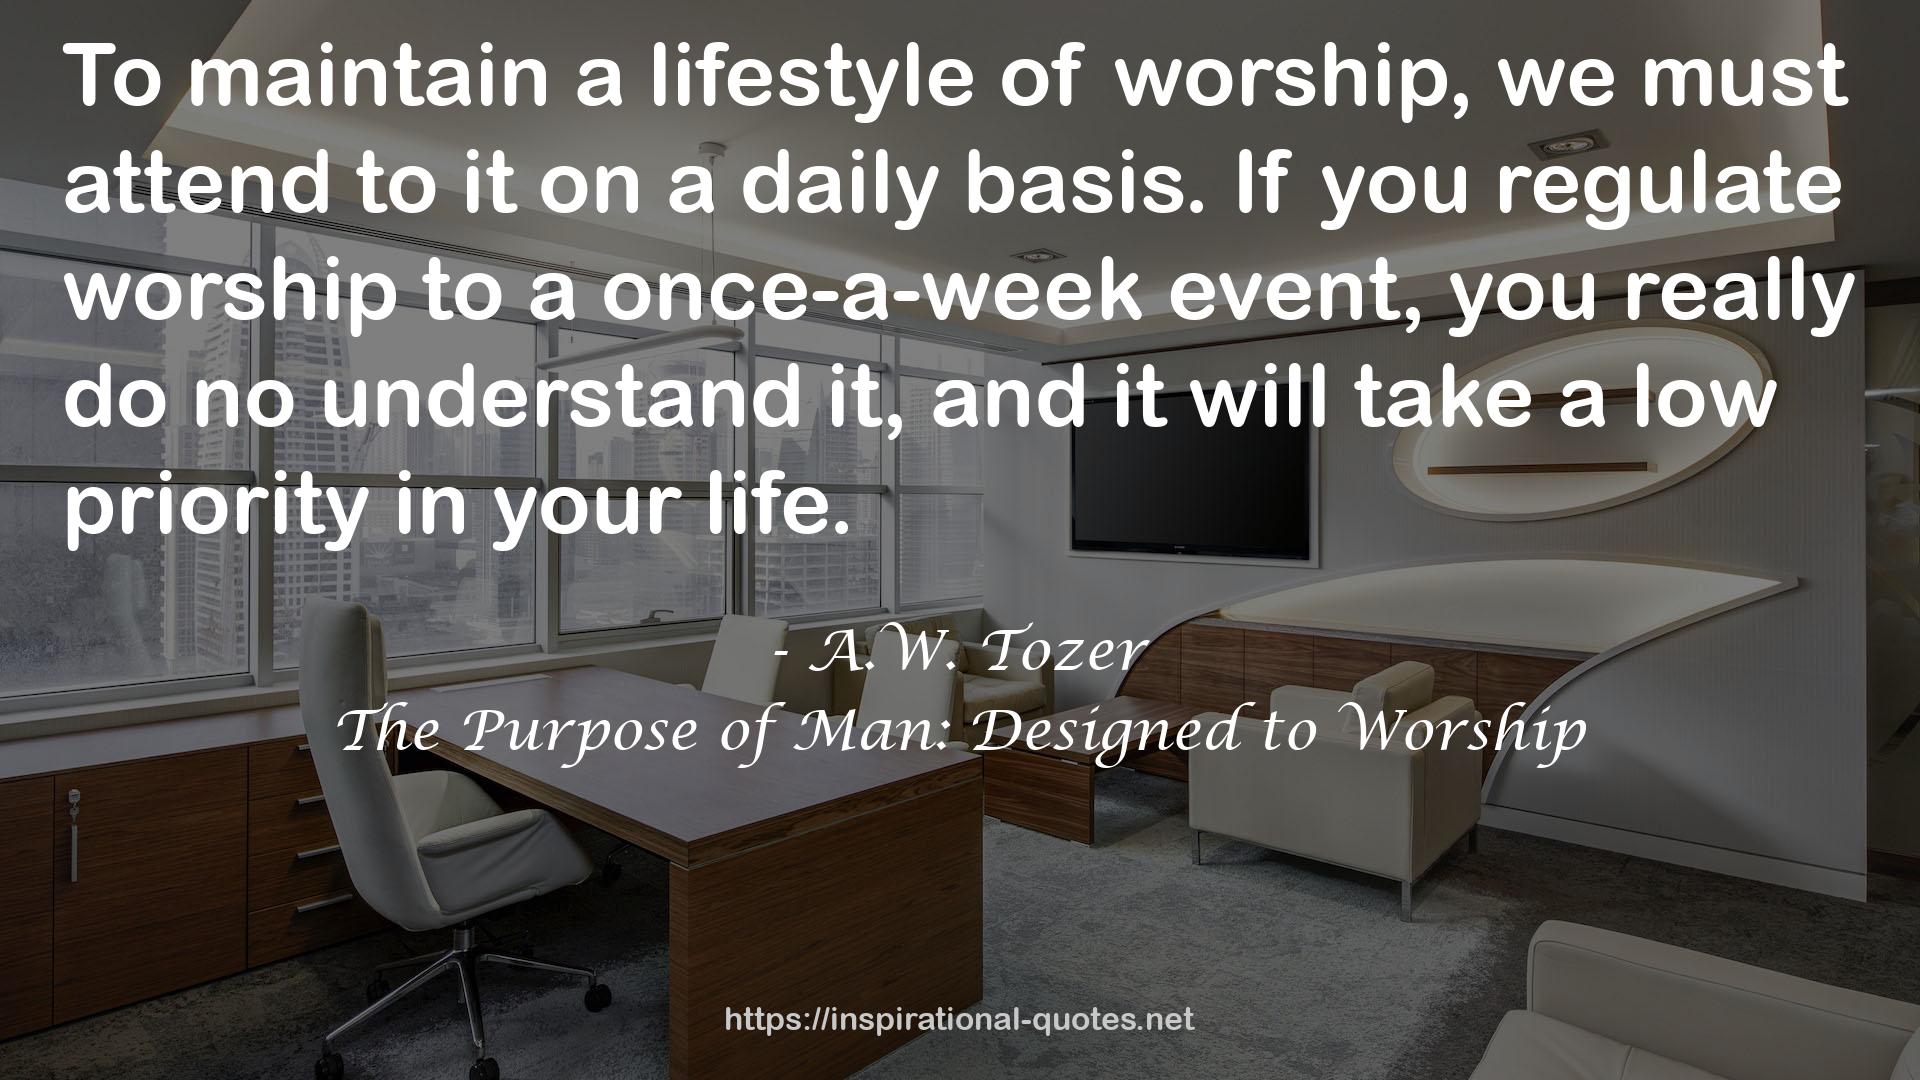 The Purpose of Man: Designed to Worship QUOTES